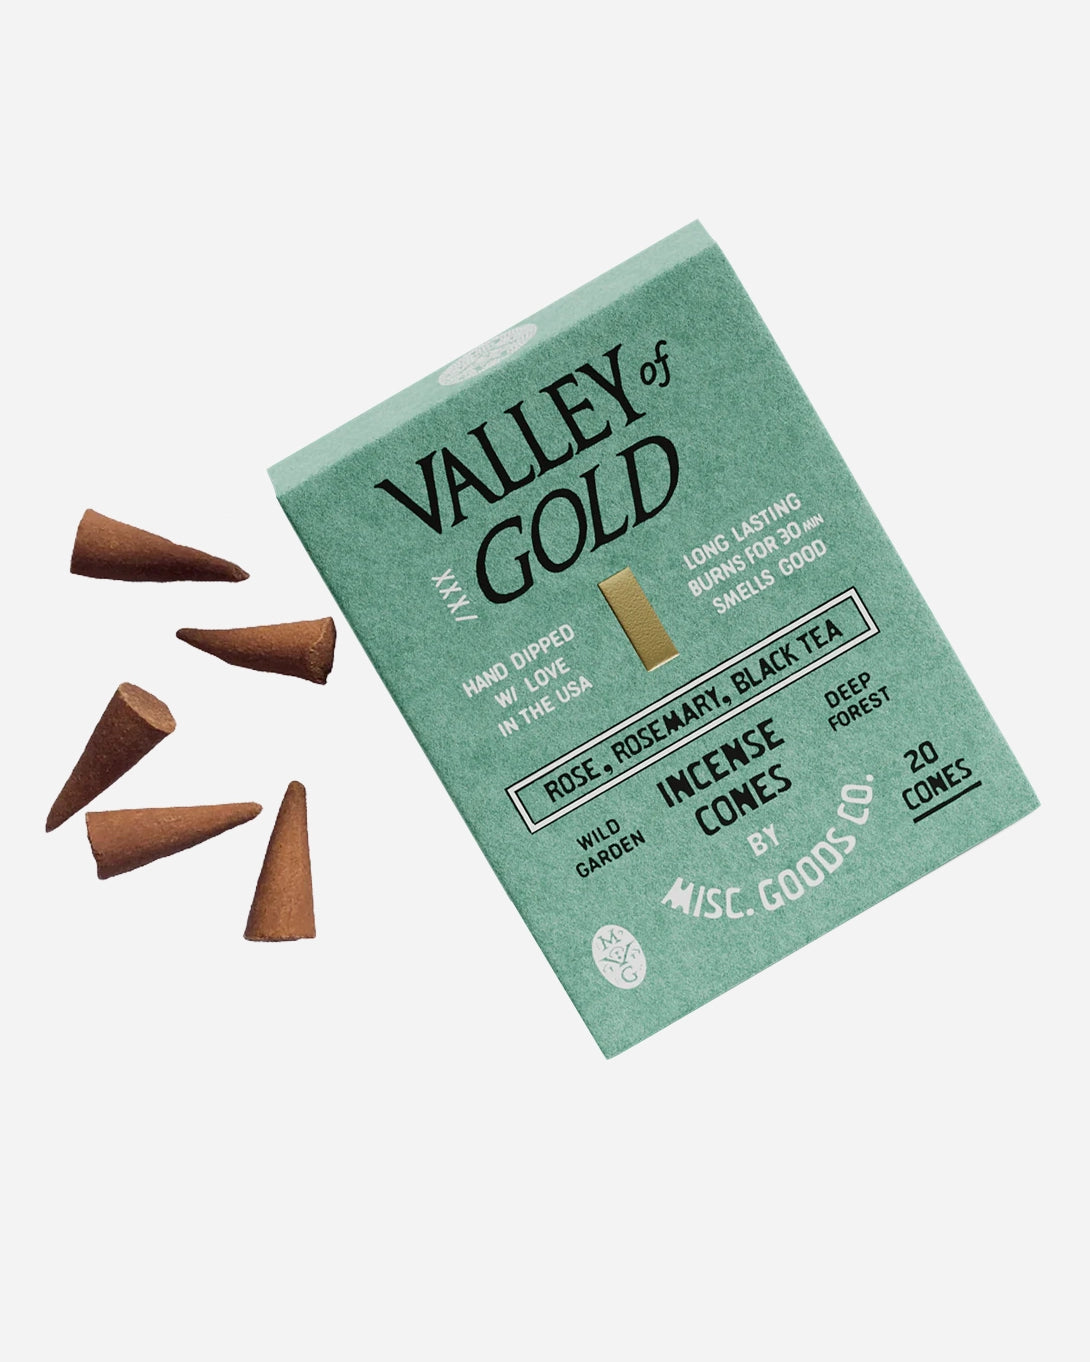 Valley of Gold Misc. Goods Incense Cones